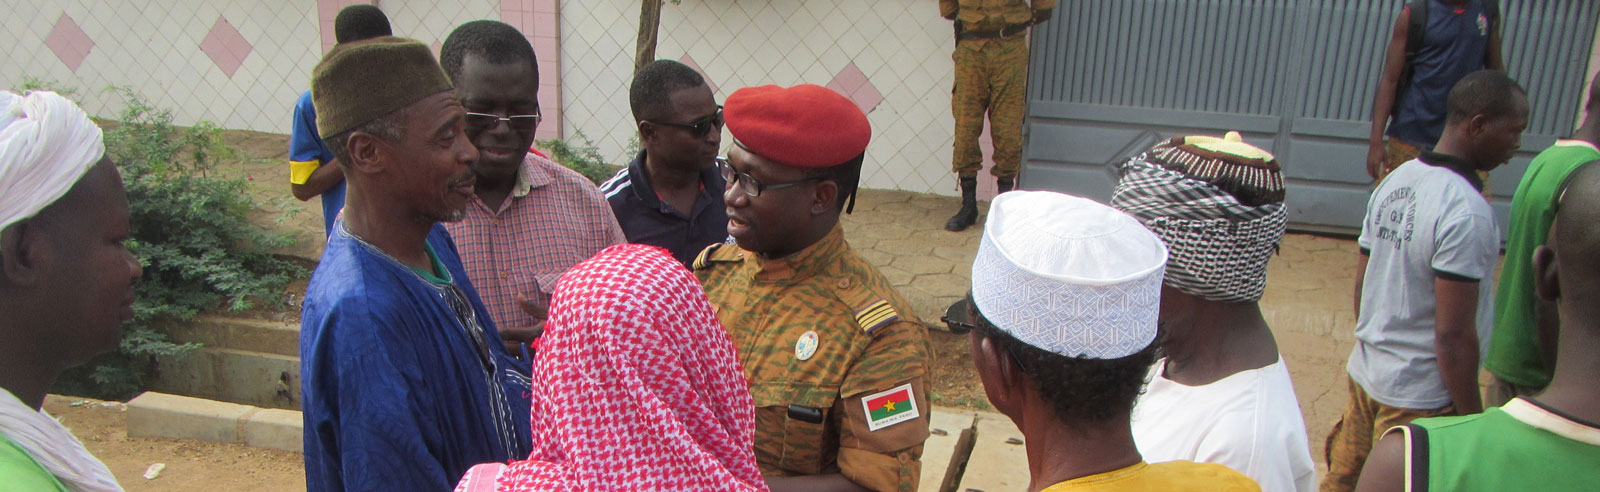 Fostering Civil-Military Cooperation to Defeat Extremism in Burkina Faso